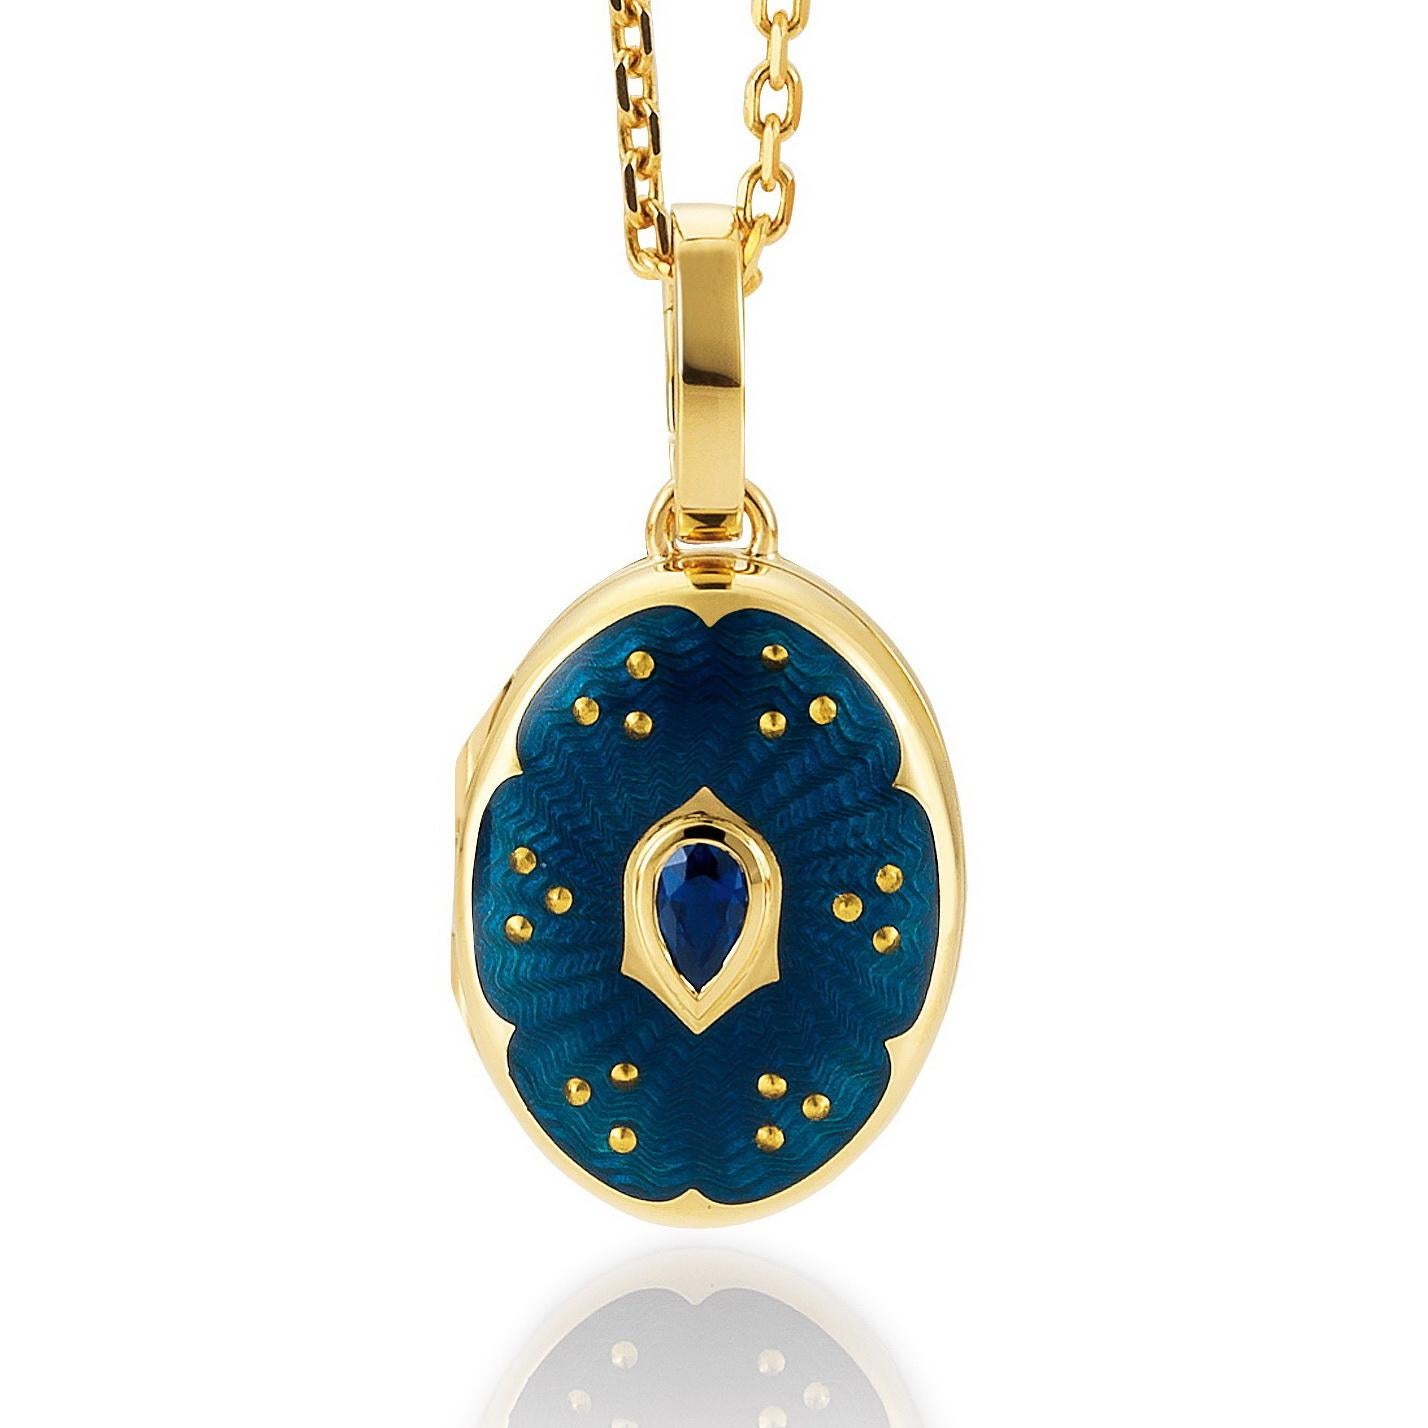  Oval Locket Pendant - 18k Yellow Gold - Blue Enamel with Paillons - 1 Sapphire